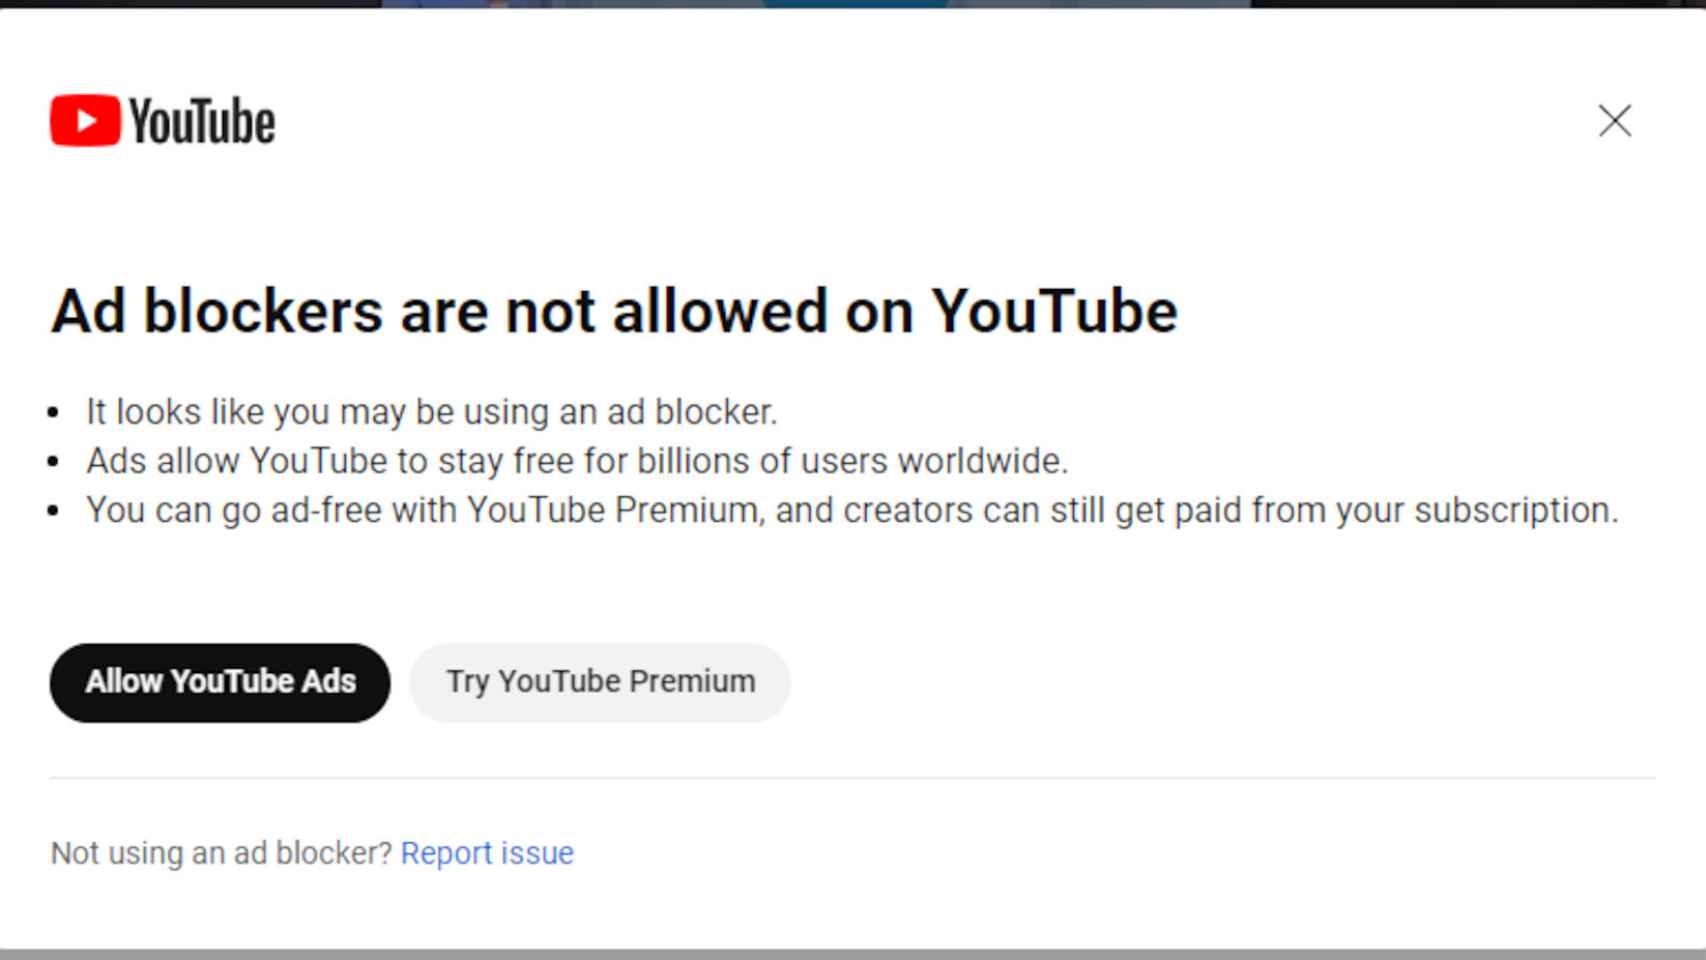 The message that appears for some YouTube users